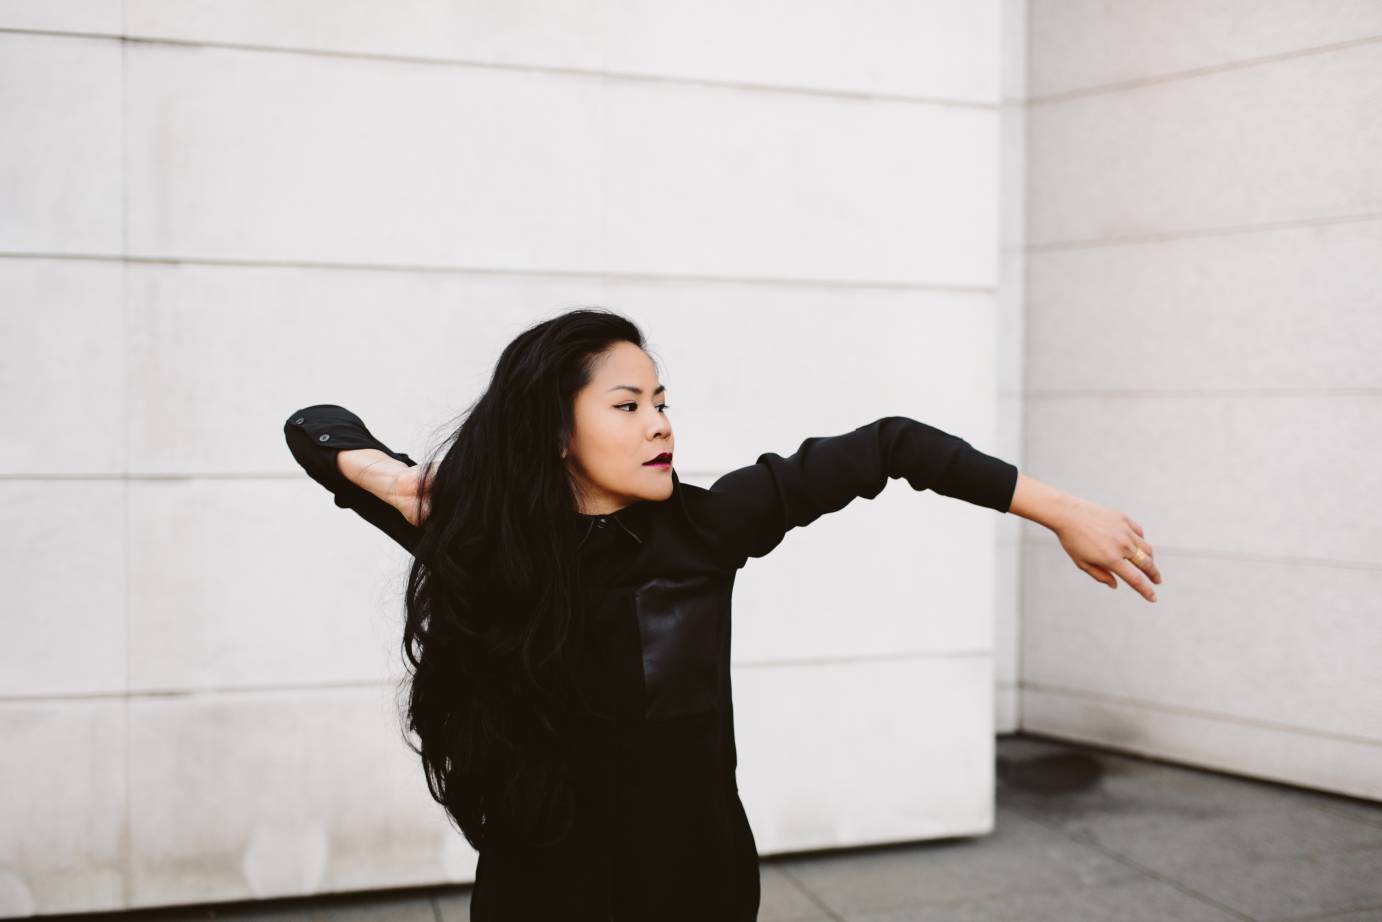 Devin Oshiro, and Asian Woman with long black hair wearing an outfit of all black poses against an all white back ground. She gazes to one side with one arm bent towards her hair and the other arm extended out to where she is looking, but in an angle. her red lipstick pops.  